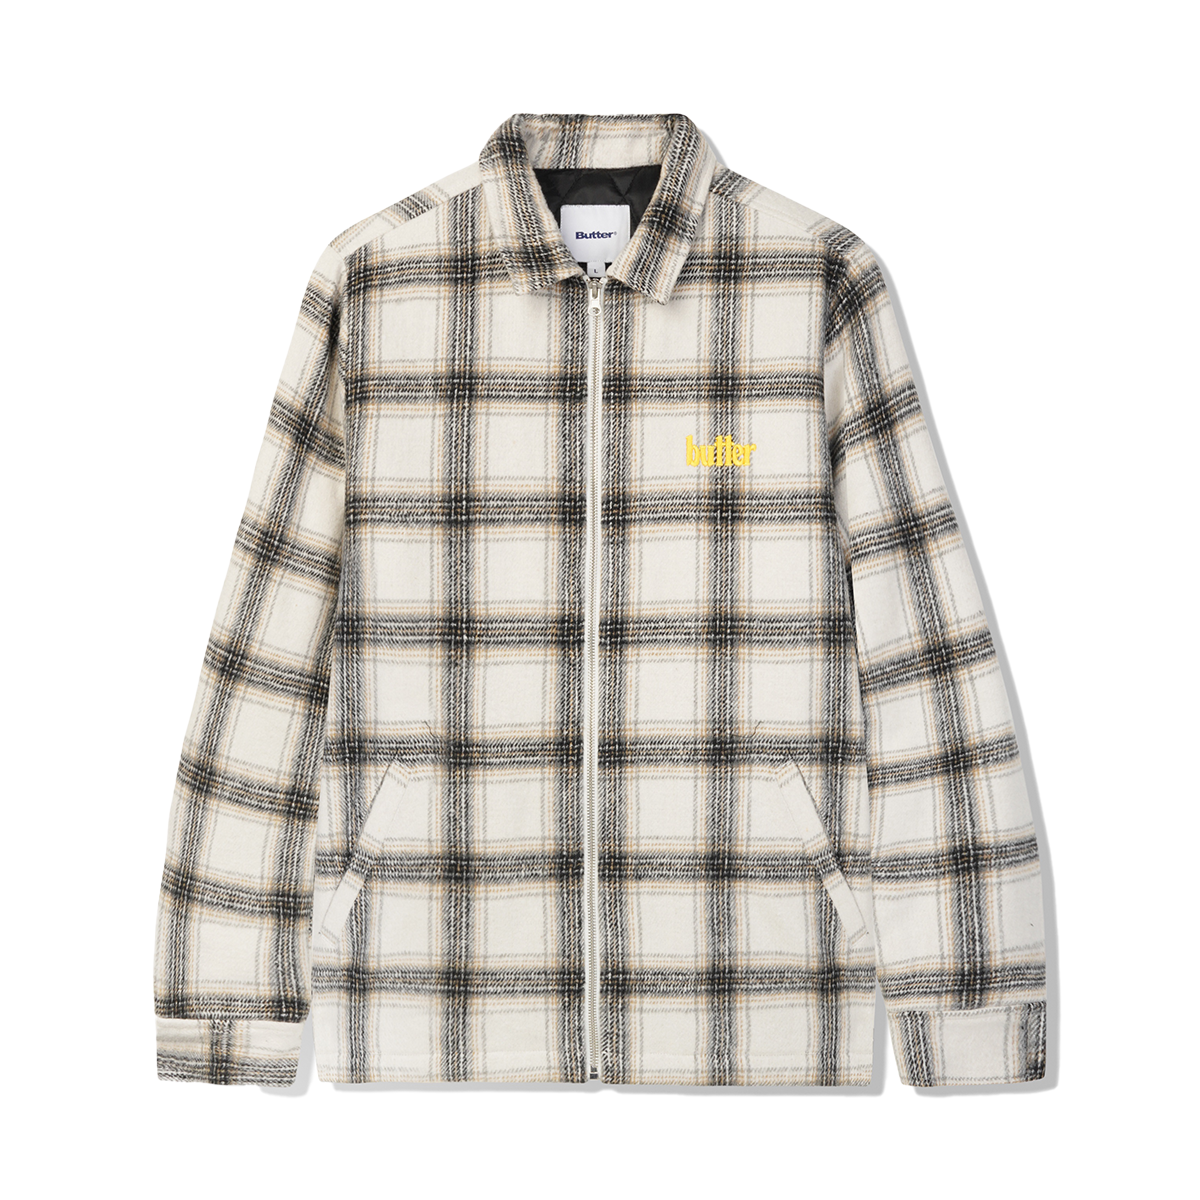 Butter Plaid Flannel Insulated Over Shirt - White